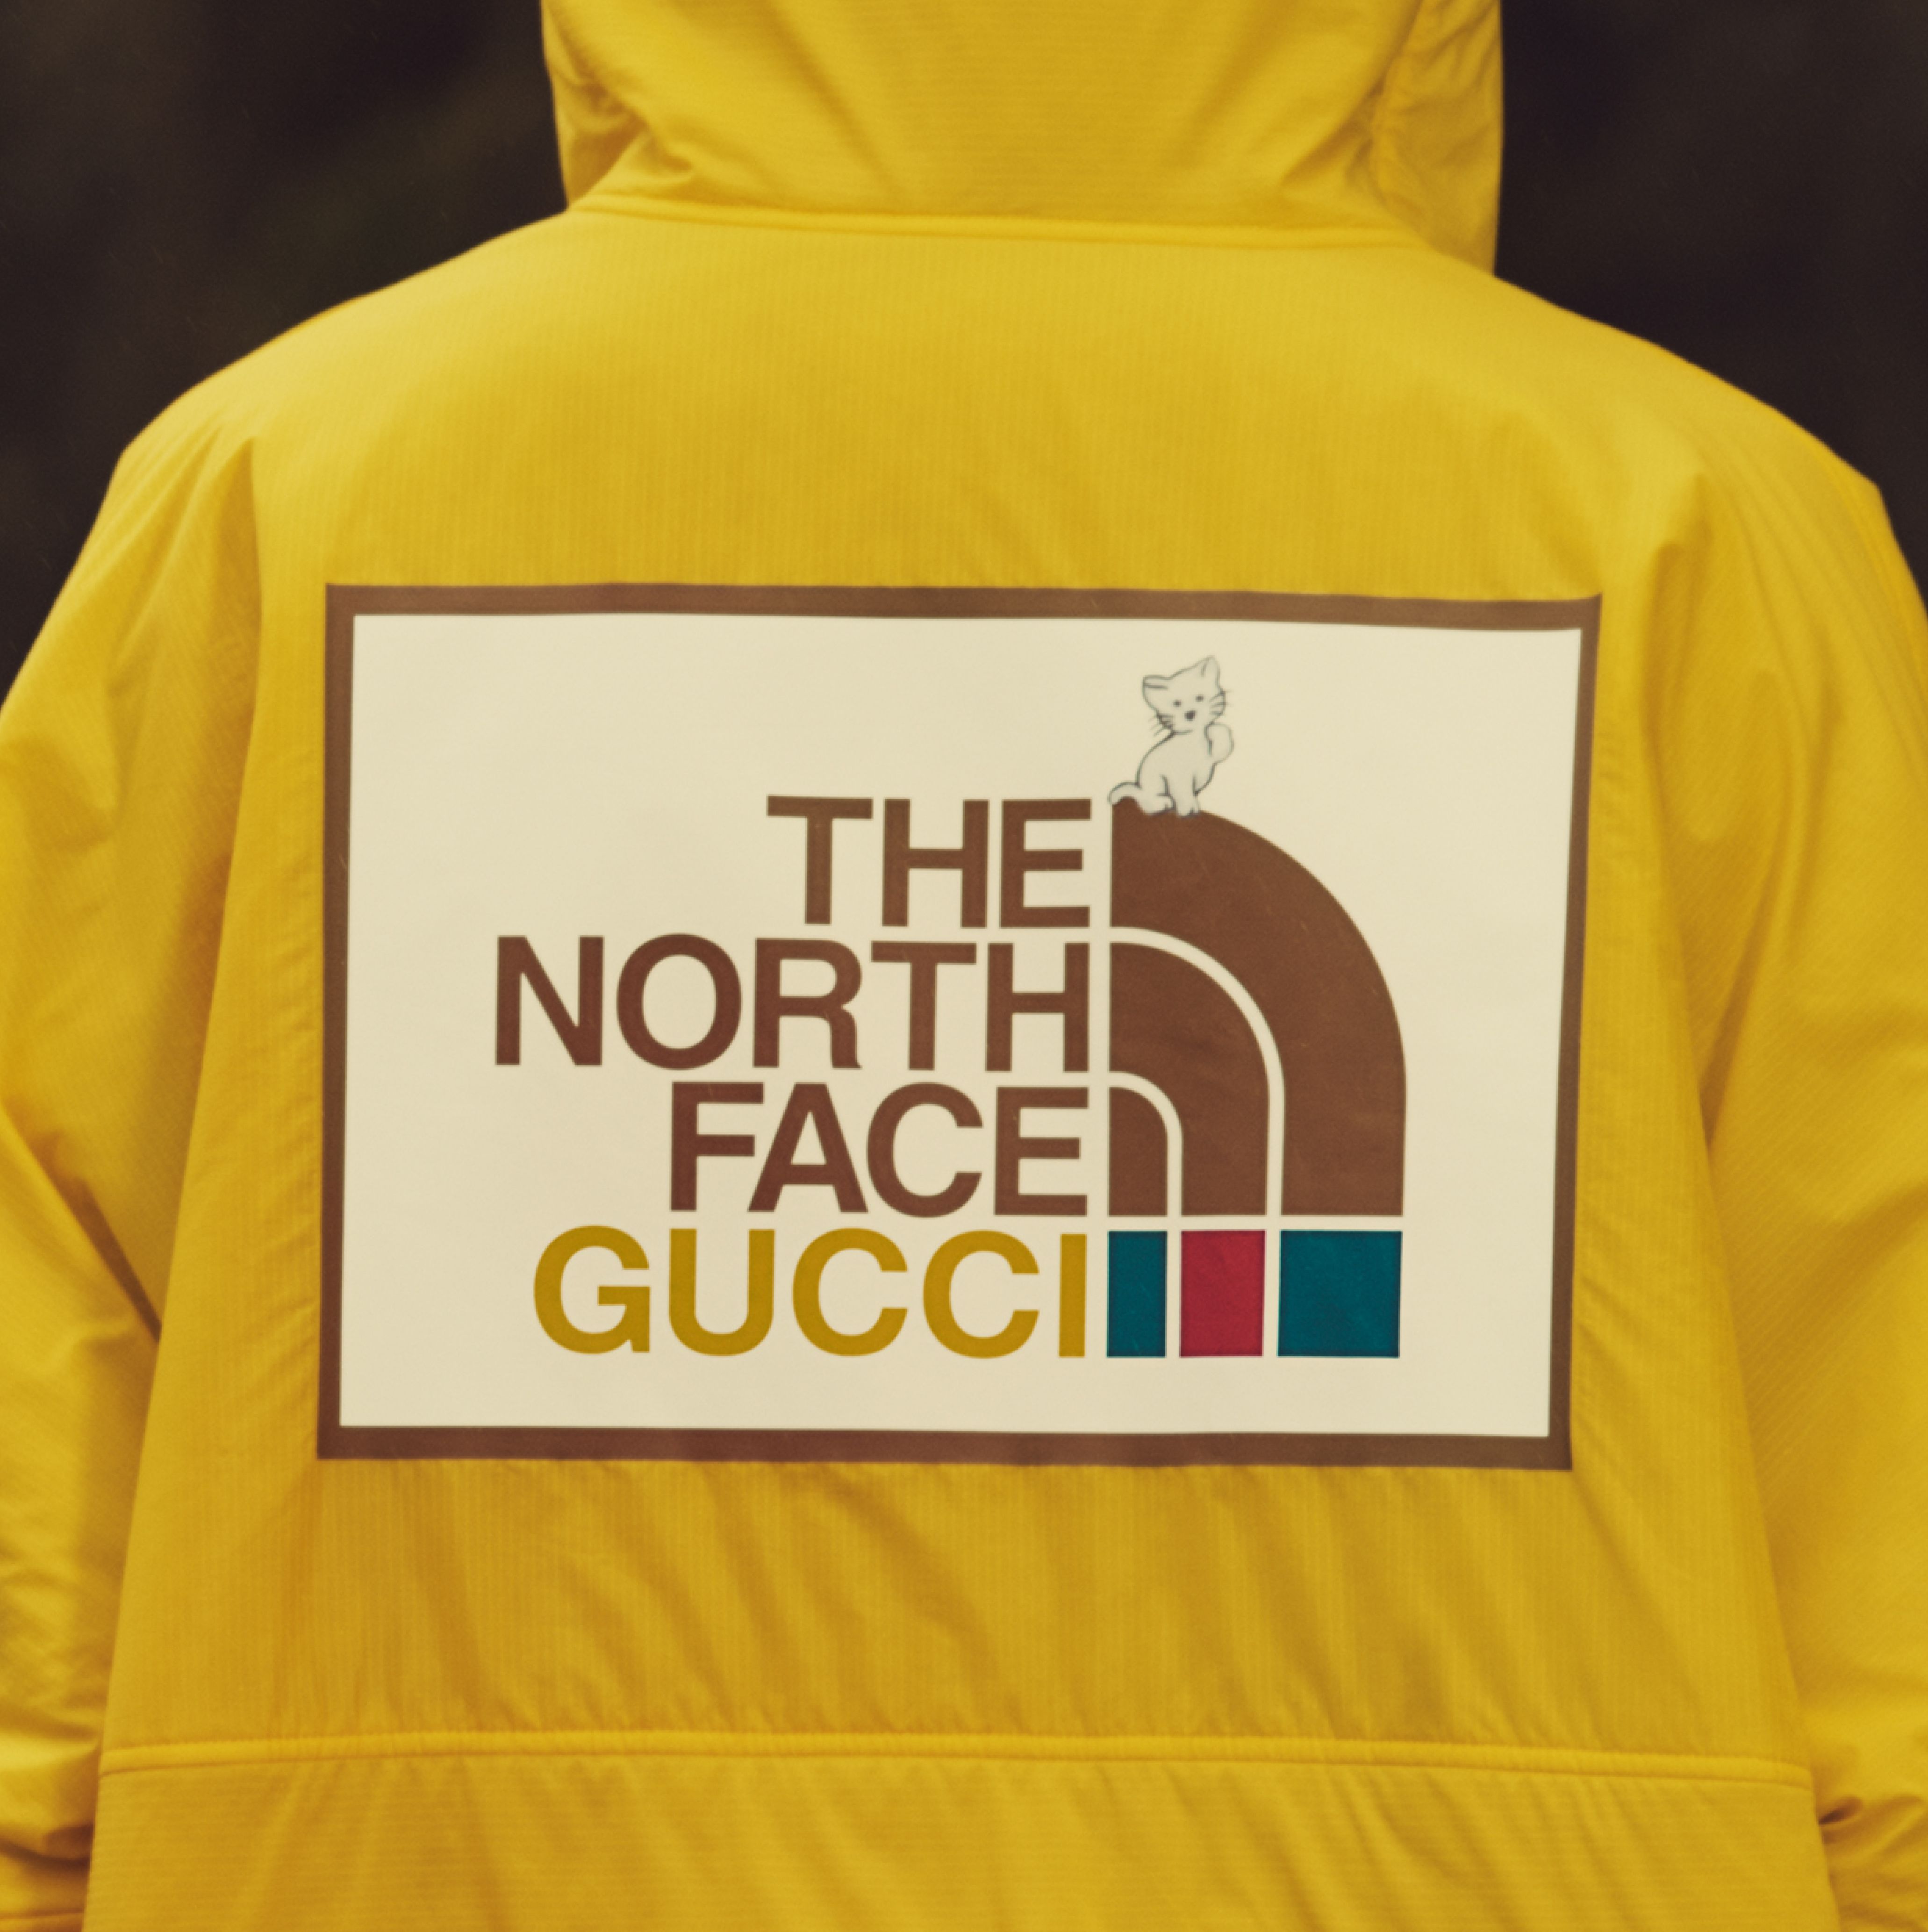 The North Face x Gucci's Second Collaboration Has Landed